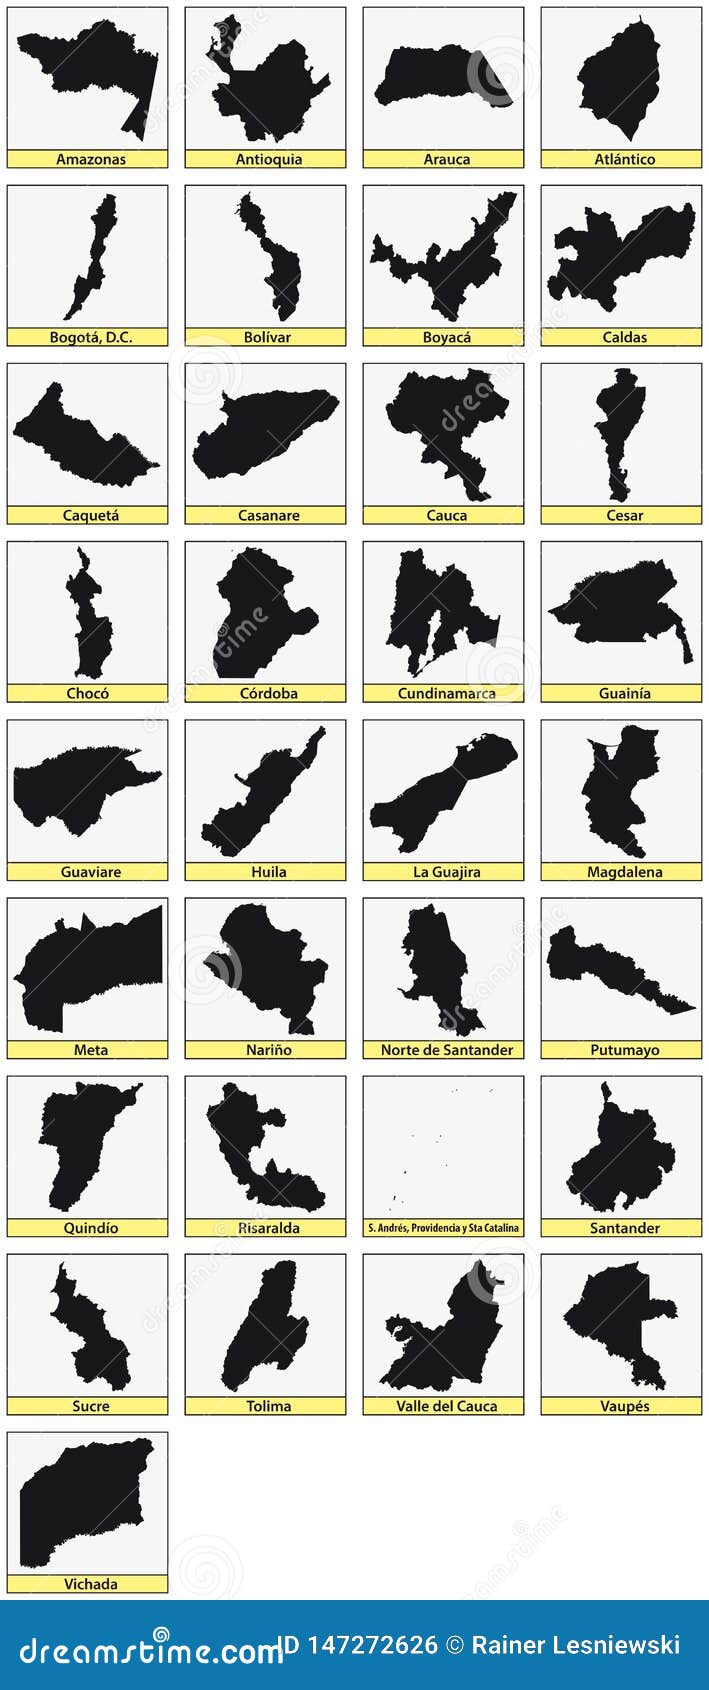 thirtythree black maps of the departments of colombia